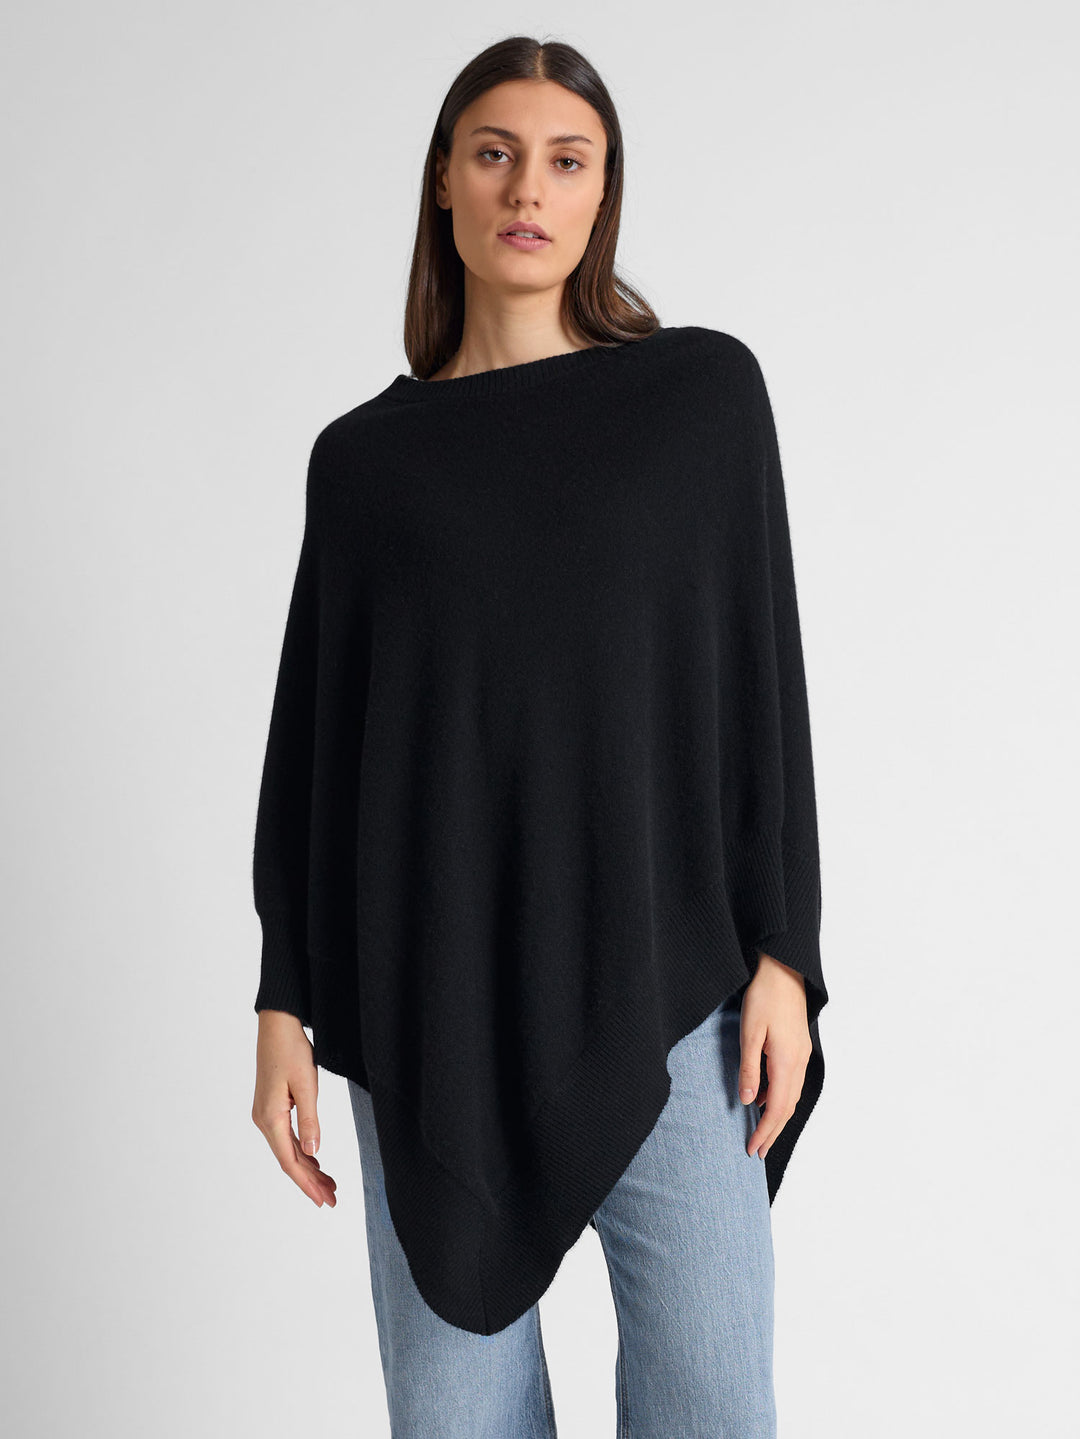 Cashmere poncho "Haddy" in 100% pure cashmere. Scandinavian design by Kashmina. Color: Black.